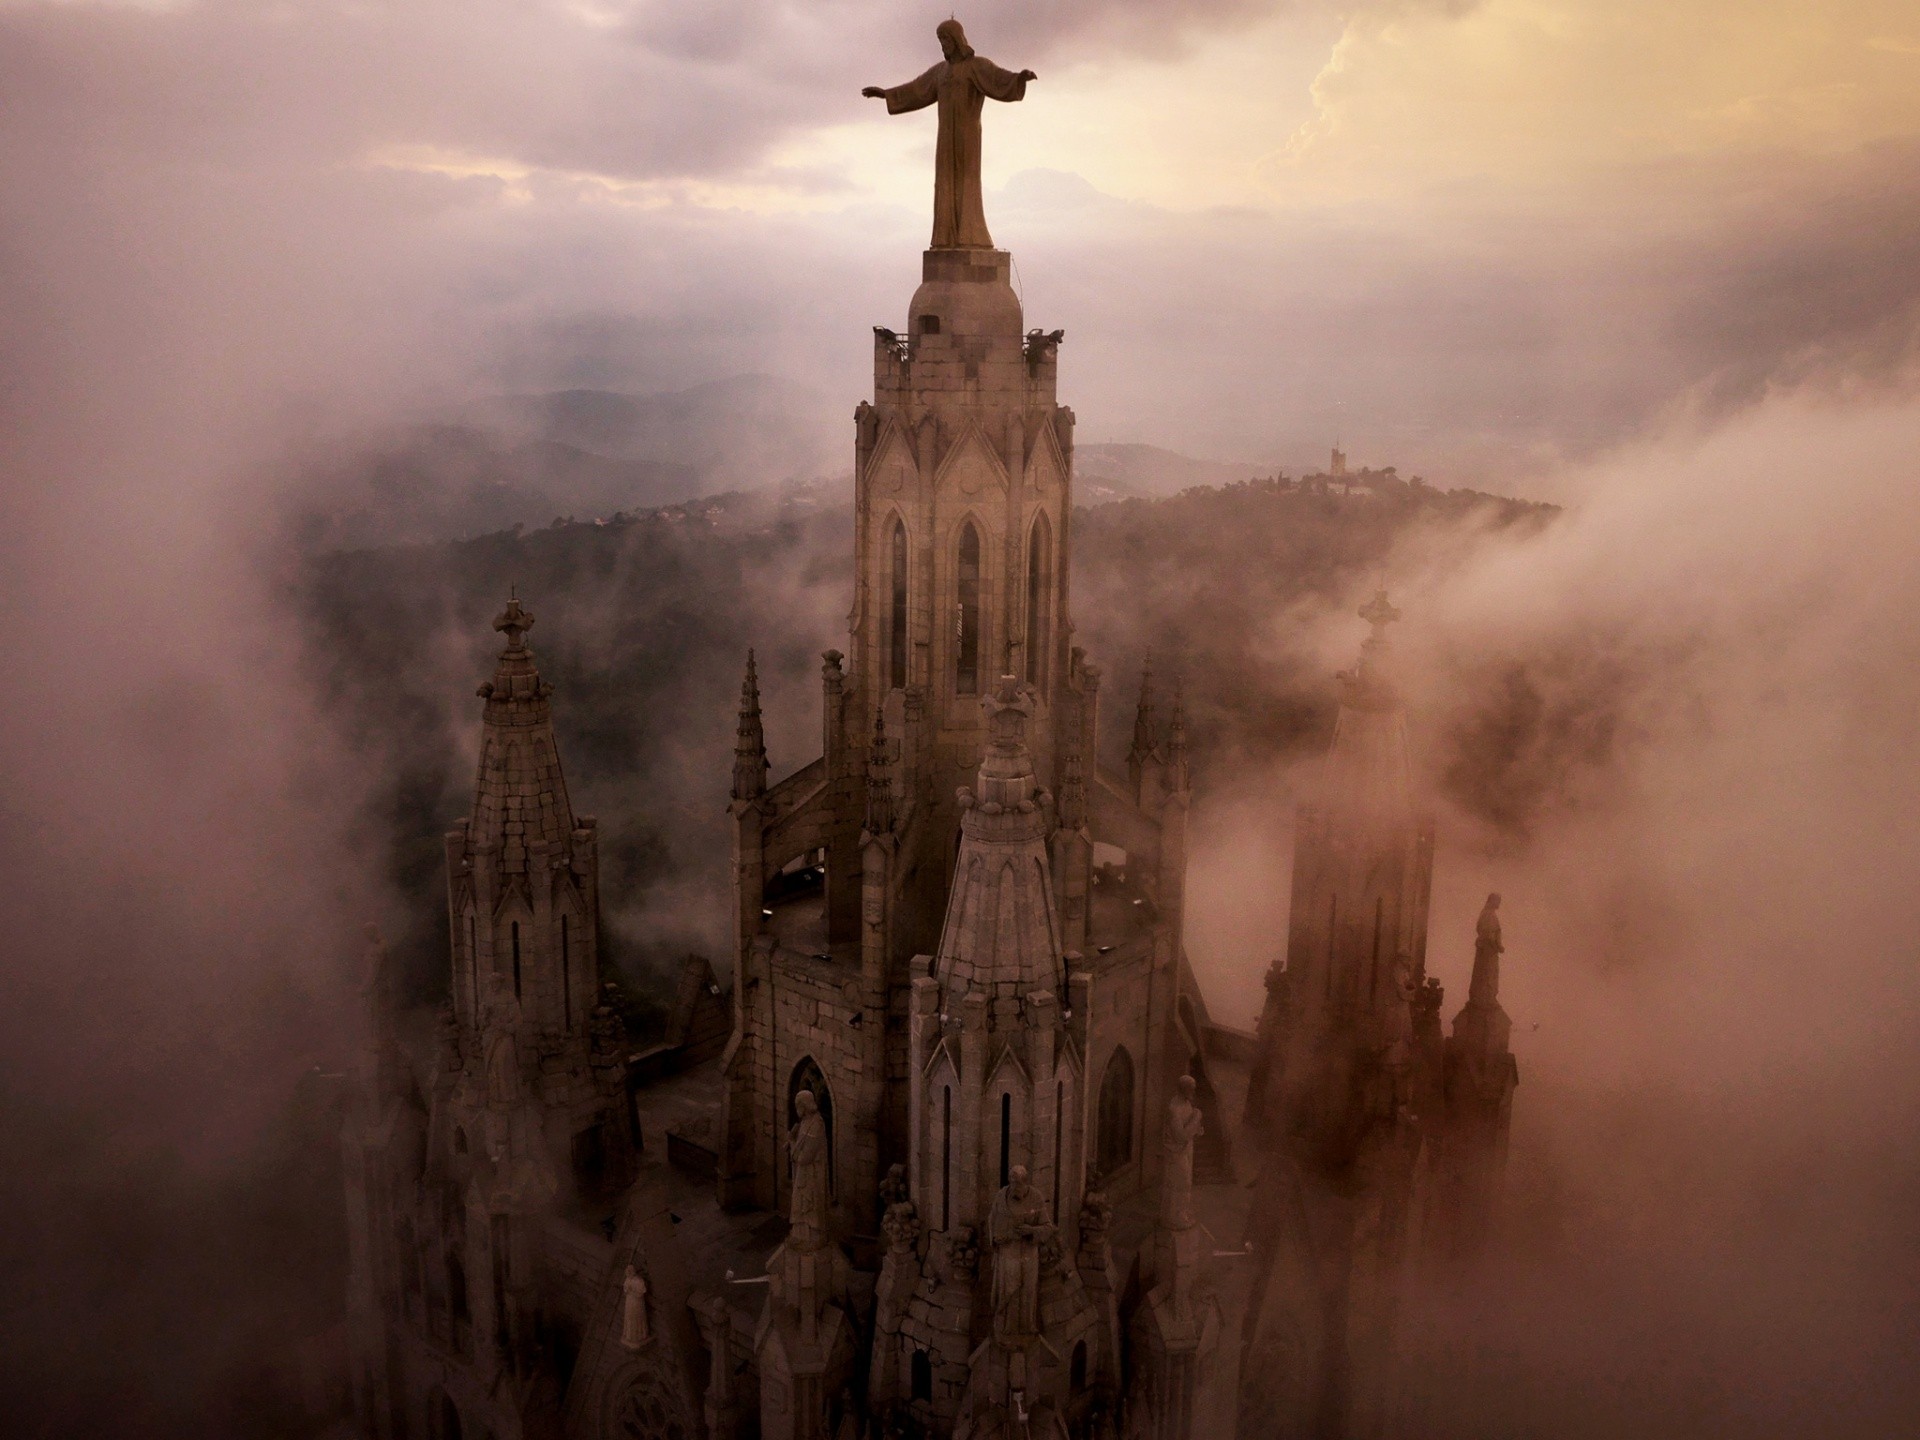 General 1920x1440 architecture building statue Jesus Christ cathedral clouds mist hills church Barcelona Spain aerial view tower